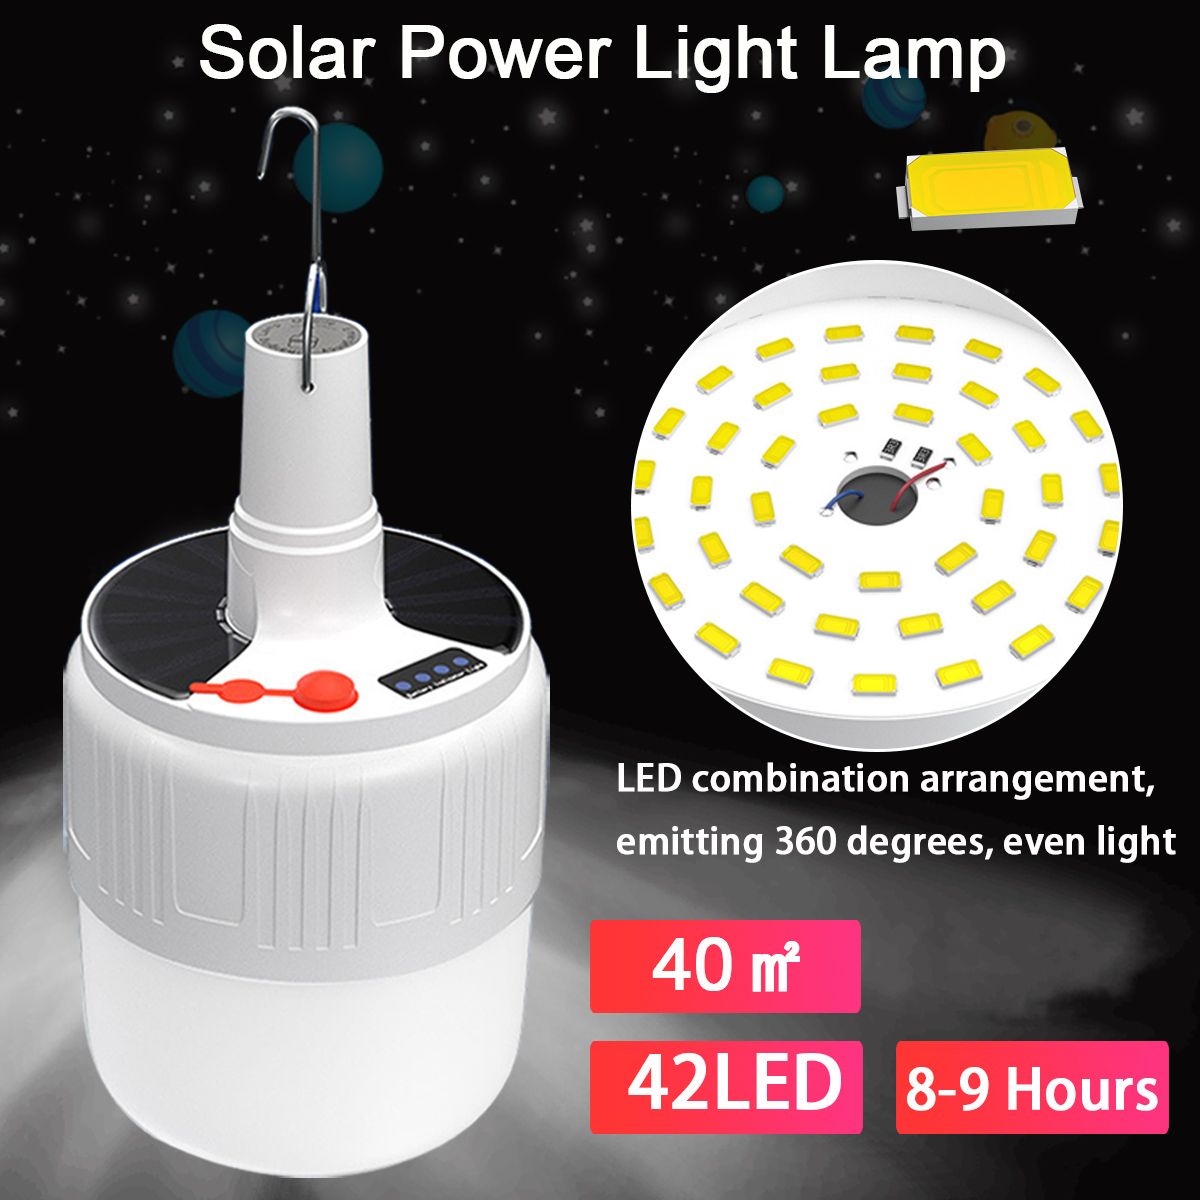 Solar-Powered-Shed-2442LED-Light-Bulb-Rechargeable-Portable-Hanging-Hook-Tent-Camping-Emergency-Lamp-1722824